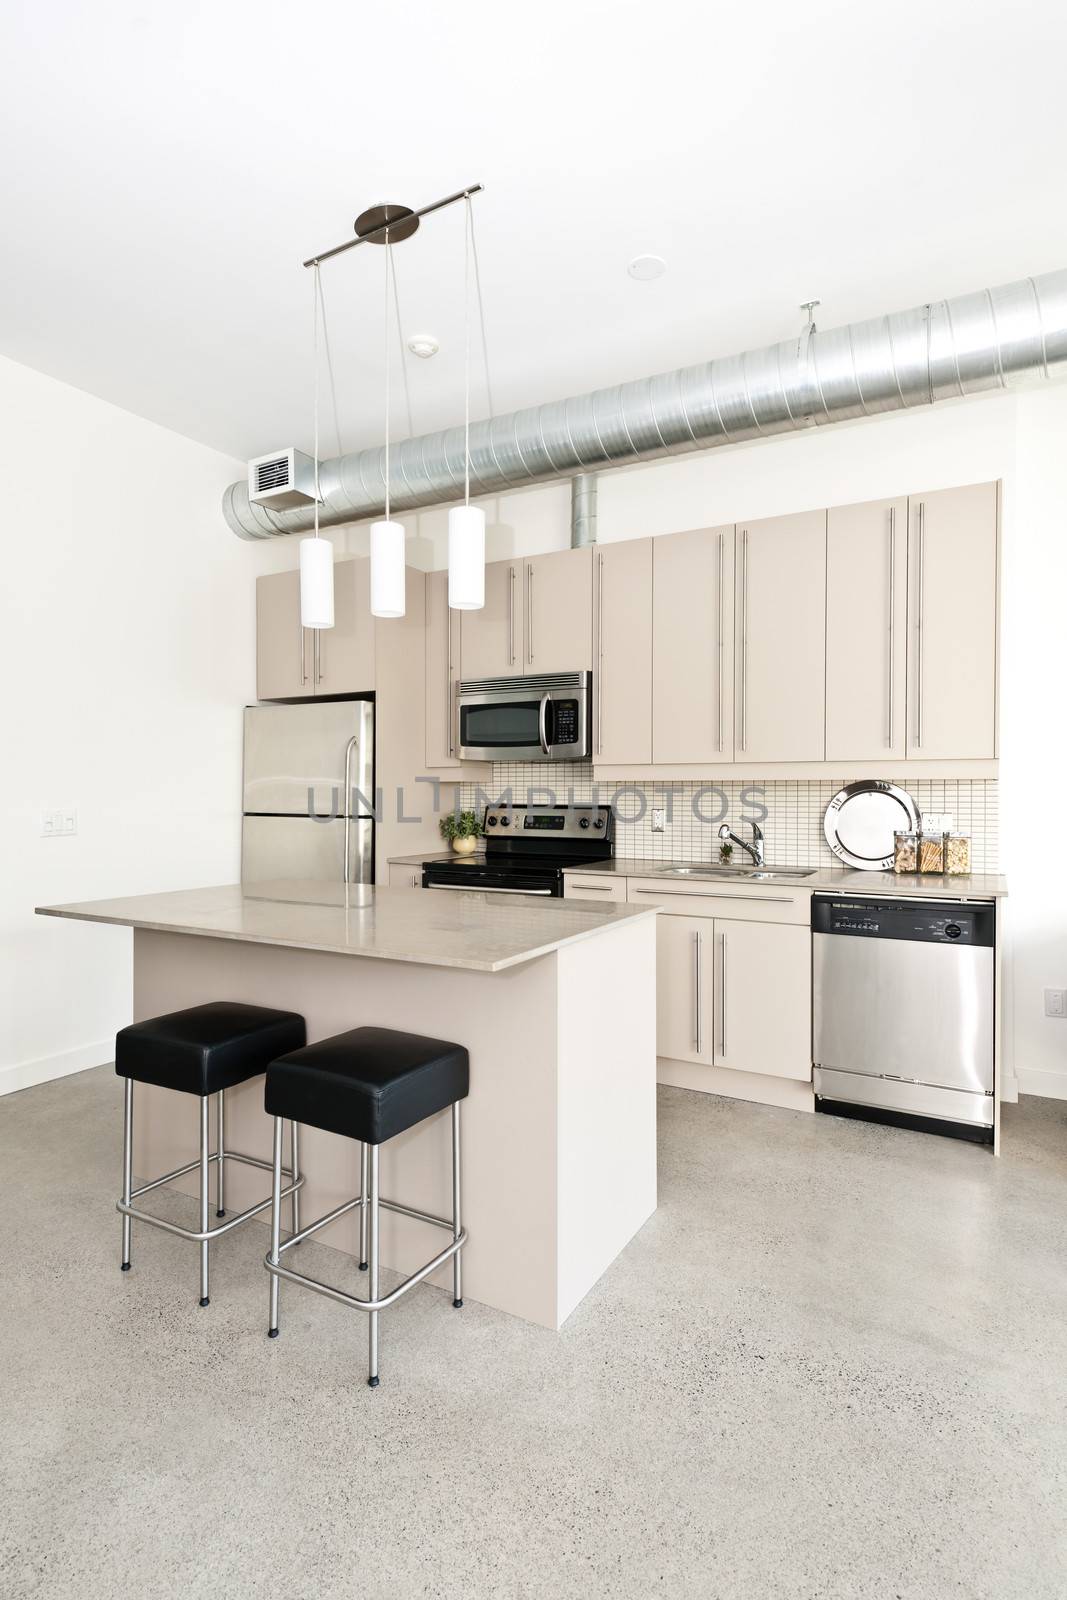 Kitchen in modern loft condo with island and stainless steel appliances